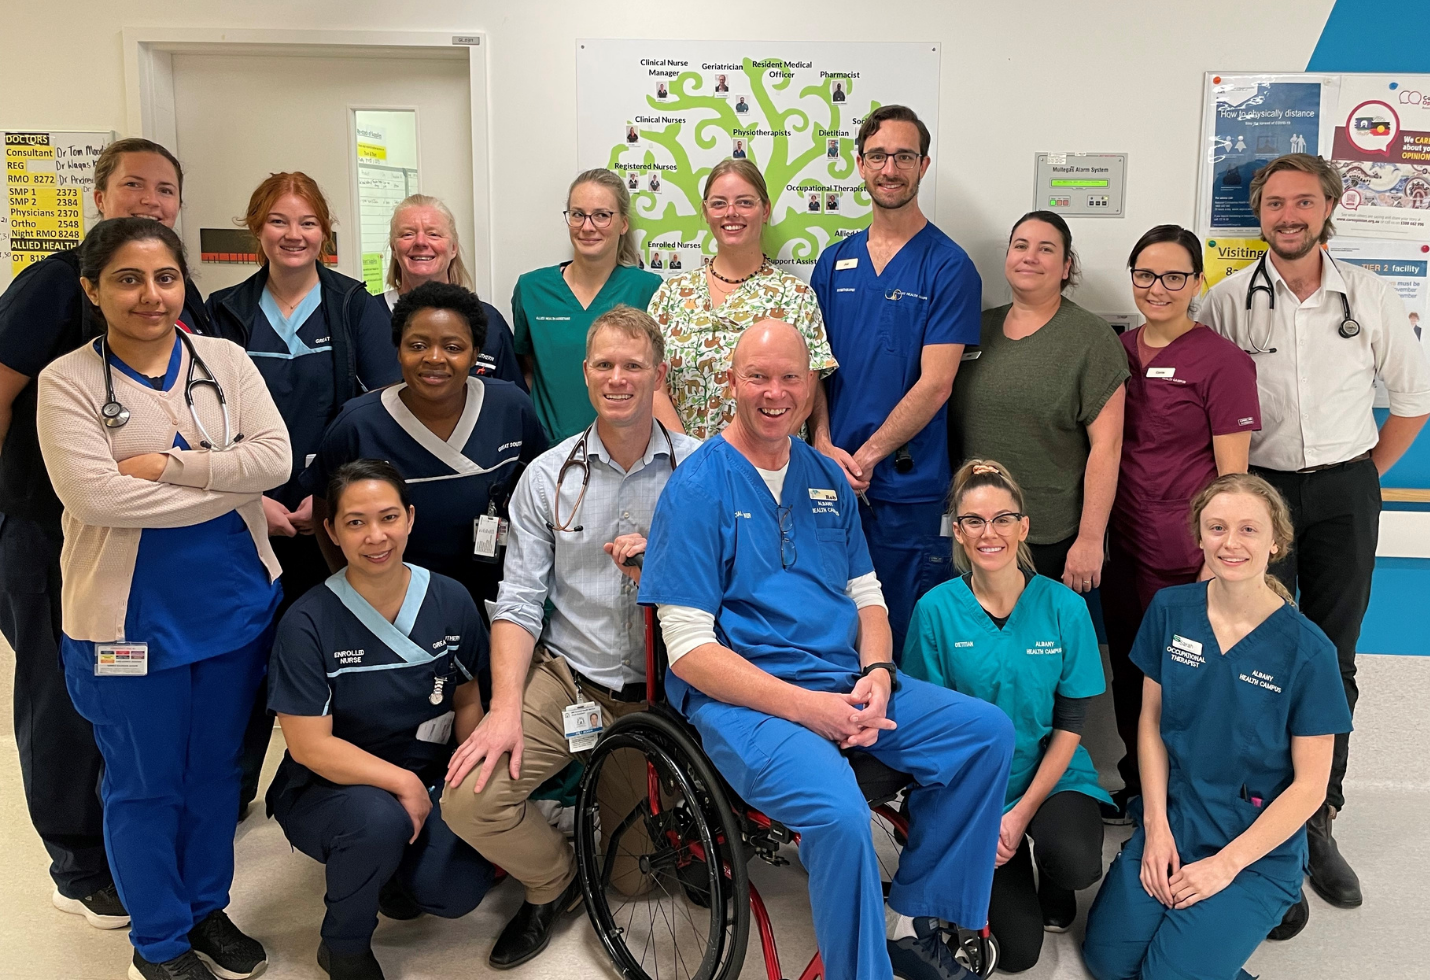 A group photo of staff members from various disciplines who make up the Albany Health Campus Rehabilitation team.